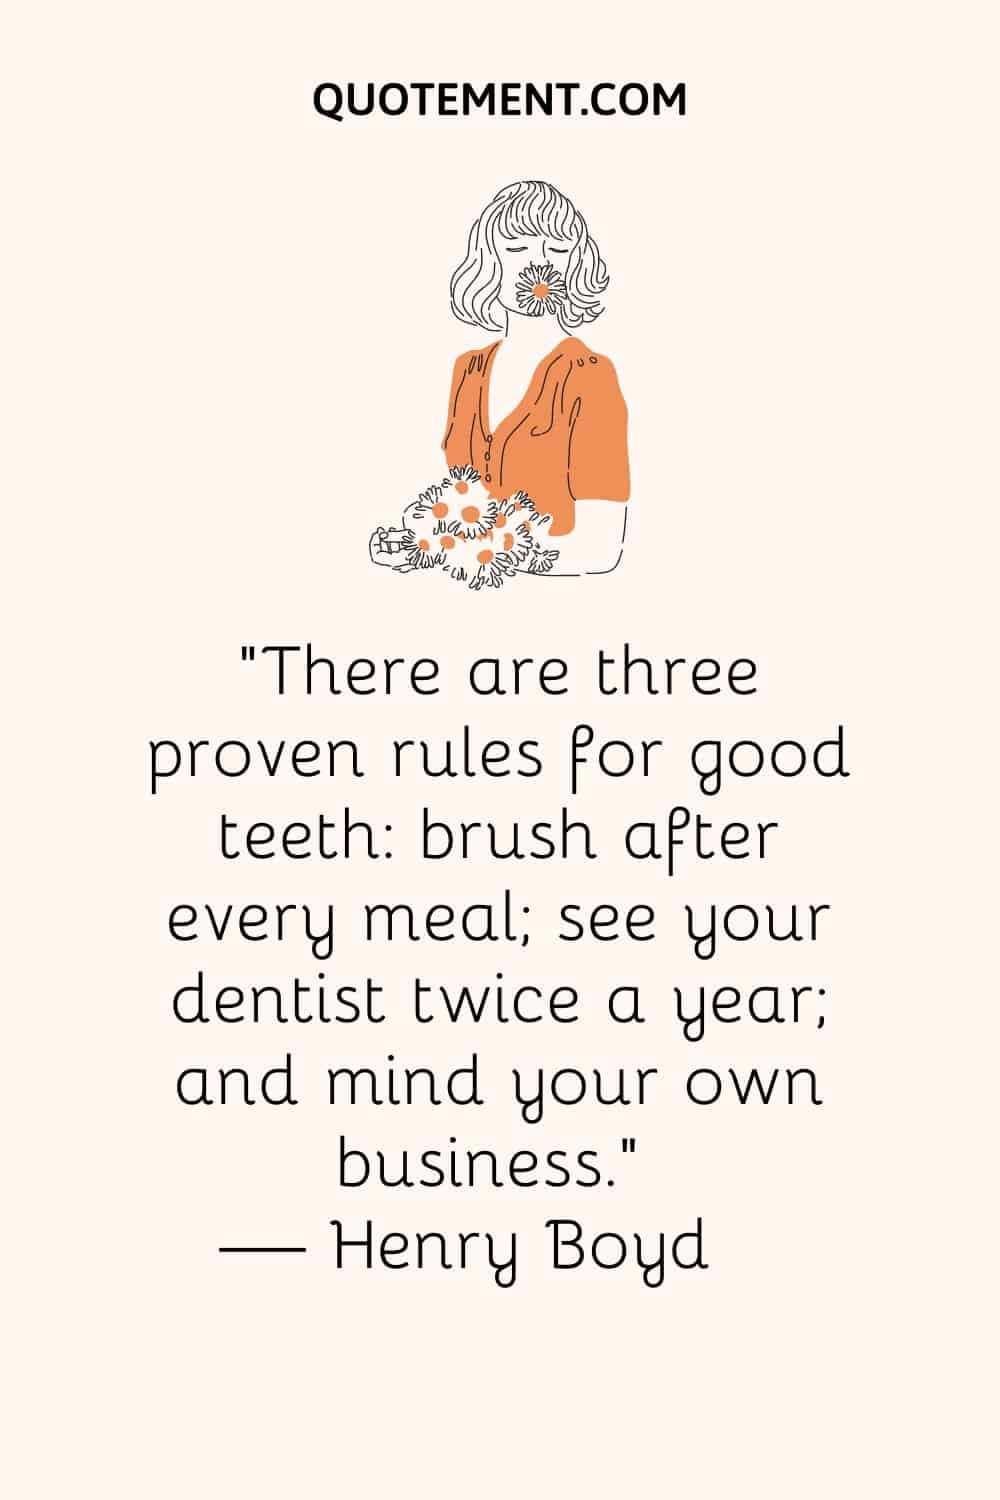 There are three proven rules for good teeth